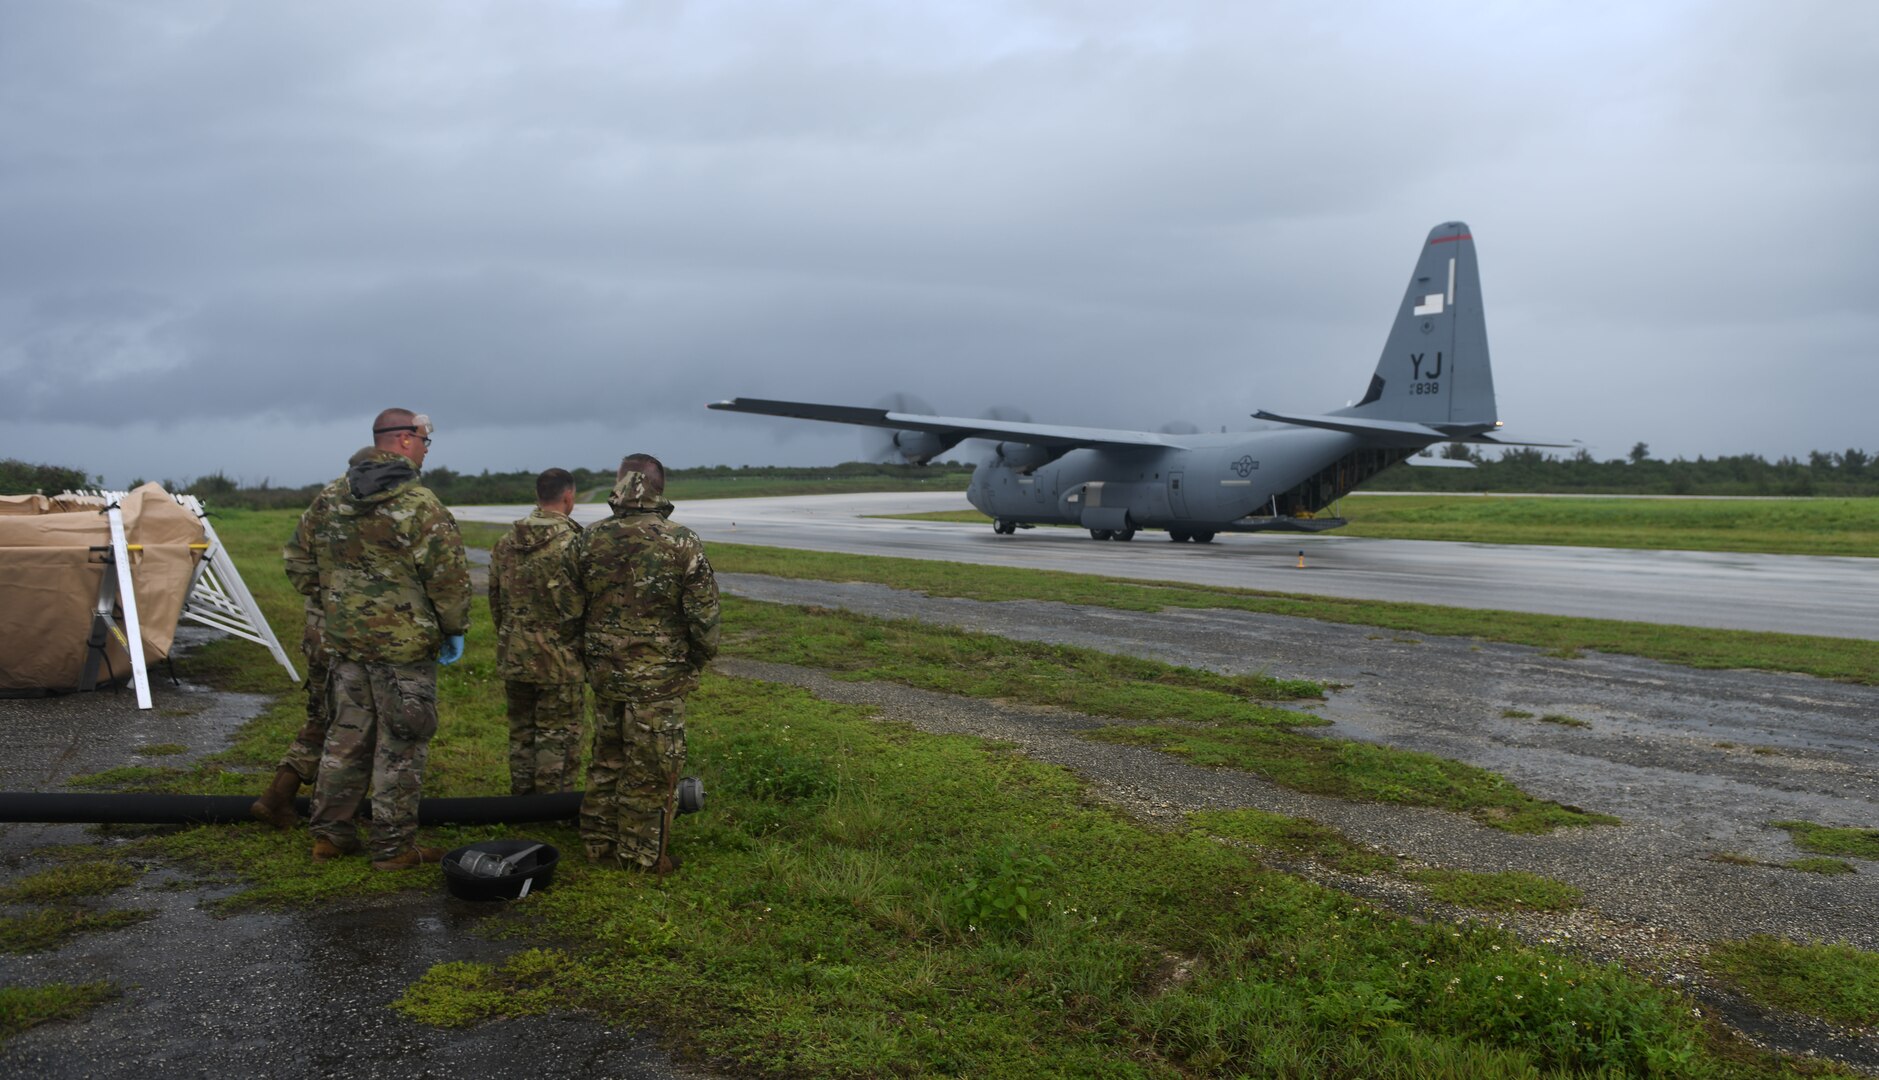 U.S. Air Force Airmen prepare to offload fuel from a C-130J Super Hercules July 21, 2021, at Tinian International Airport, Tinian, during Pacific Iron 2021. Pacific Iron 2021 is a Pacific Air Forces dynamic force employment operation to project forces into United States Indo-Pacific Command’s area of responsibility in support of a more lethal, adaptive, and resilient force.